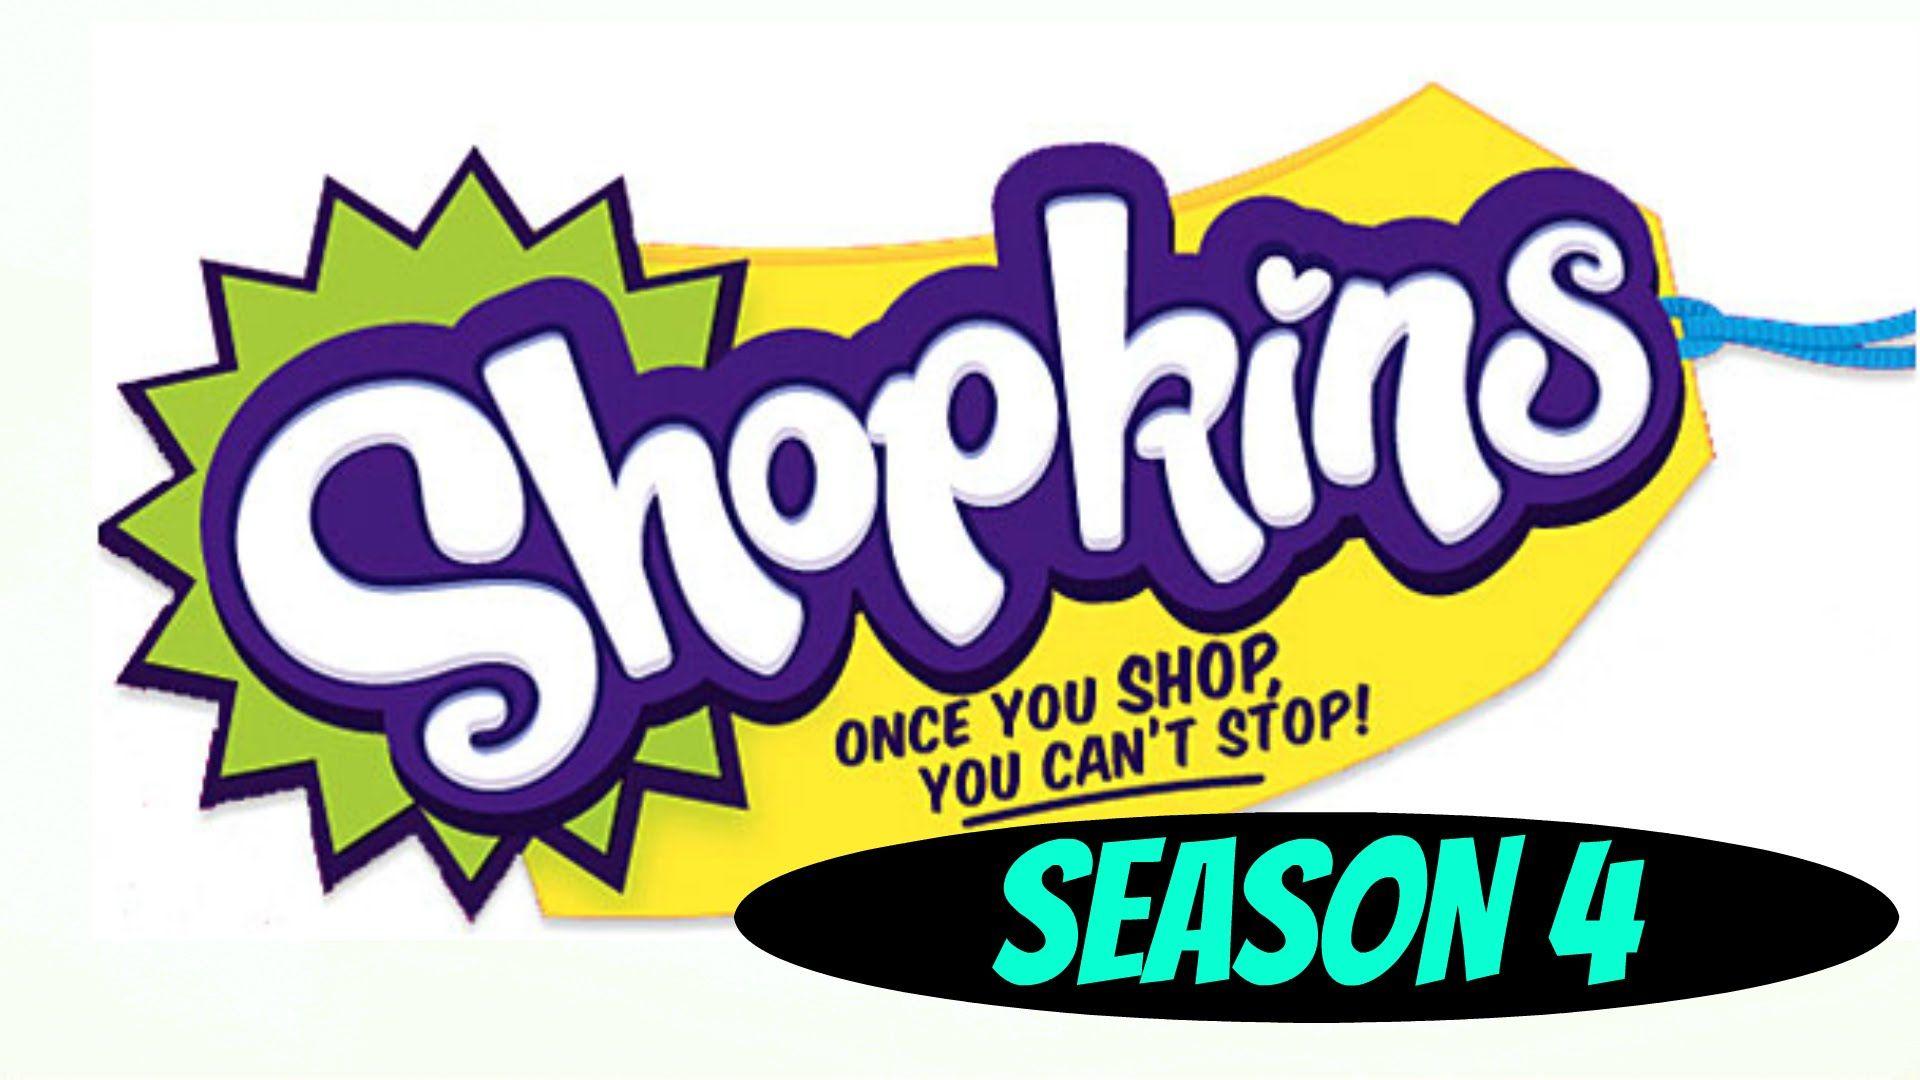 Shopkins Logo - Shopkins logo image library download free - RR collections